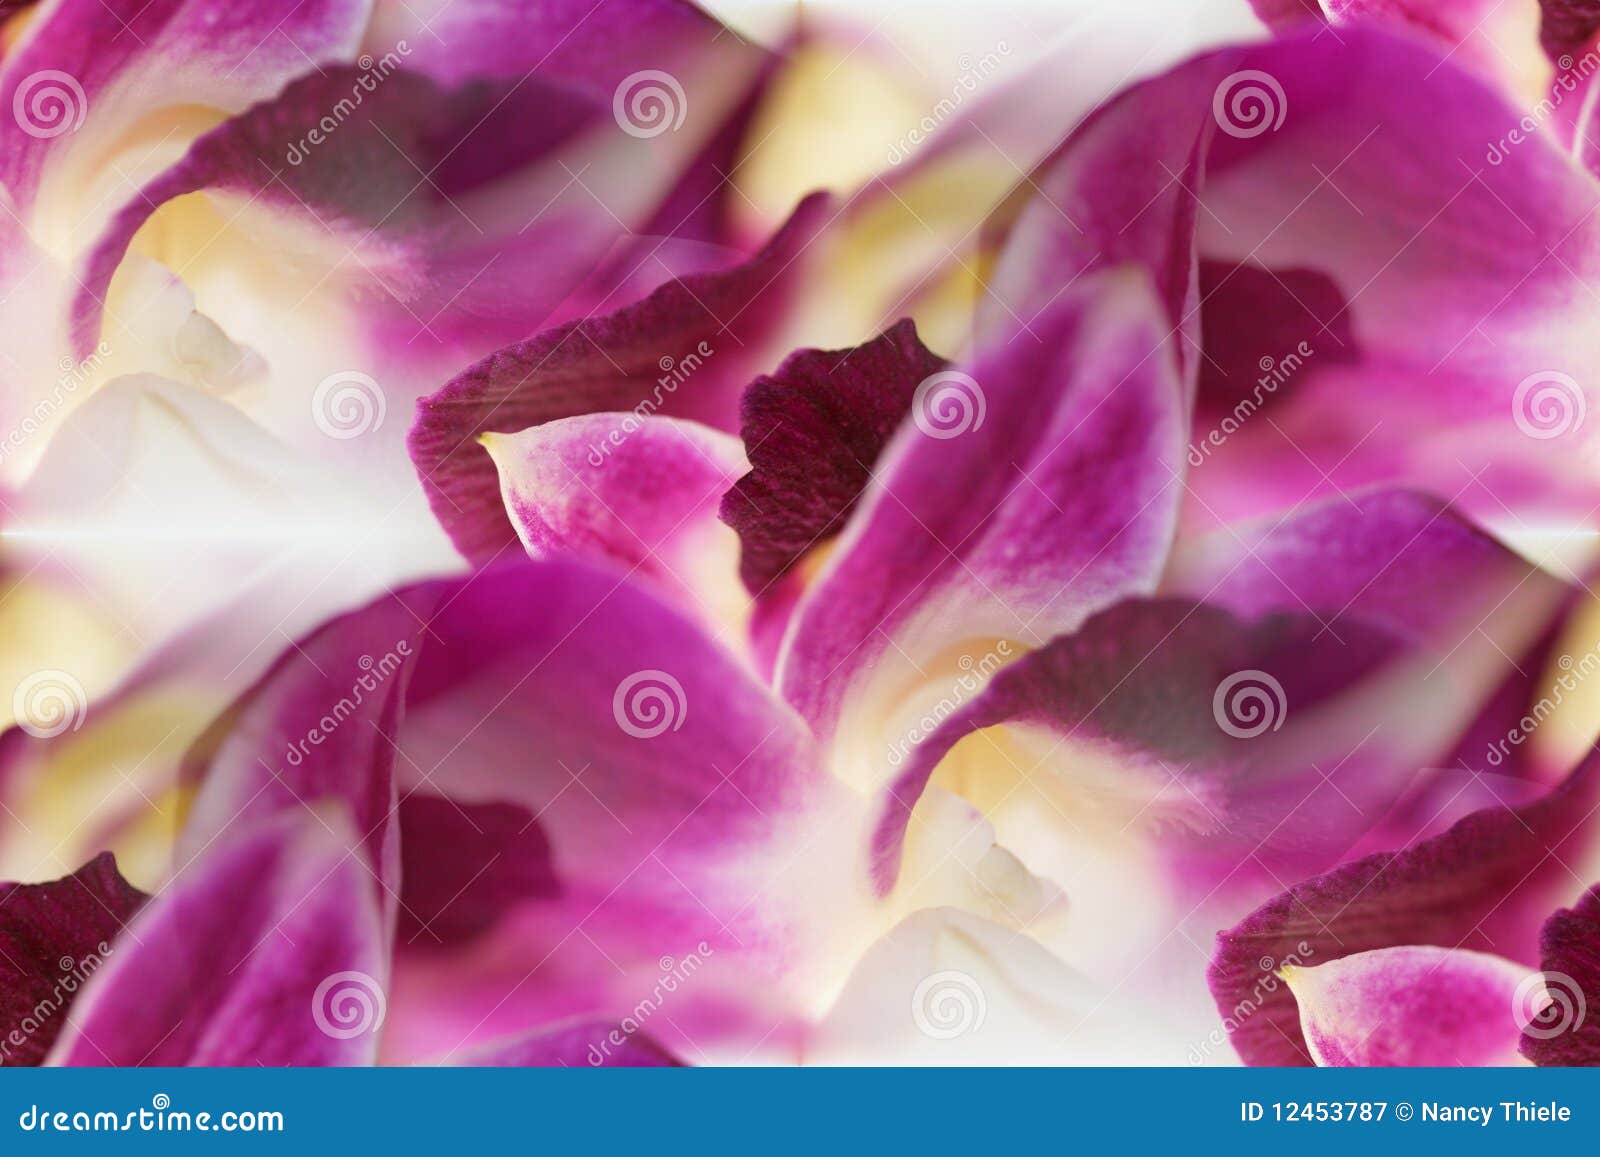 Dendrobium Orchid Lei Abstract Stock Image Image Of Background Delicate